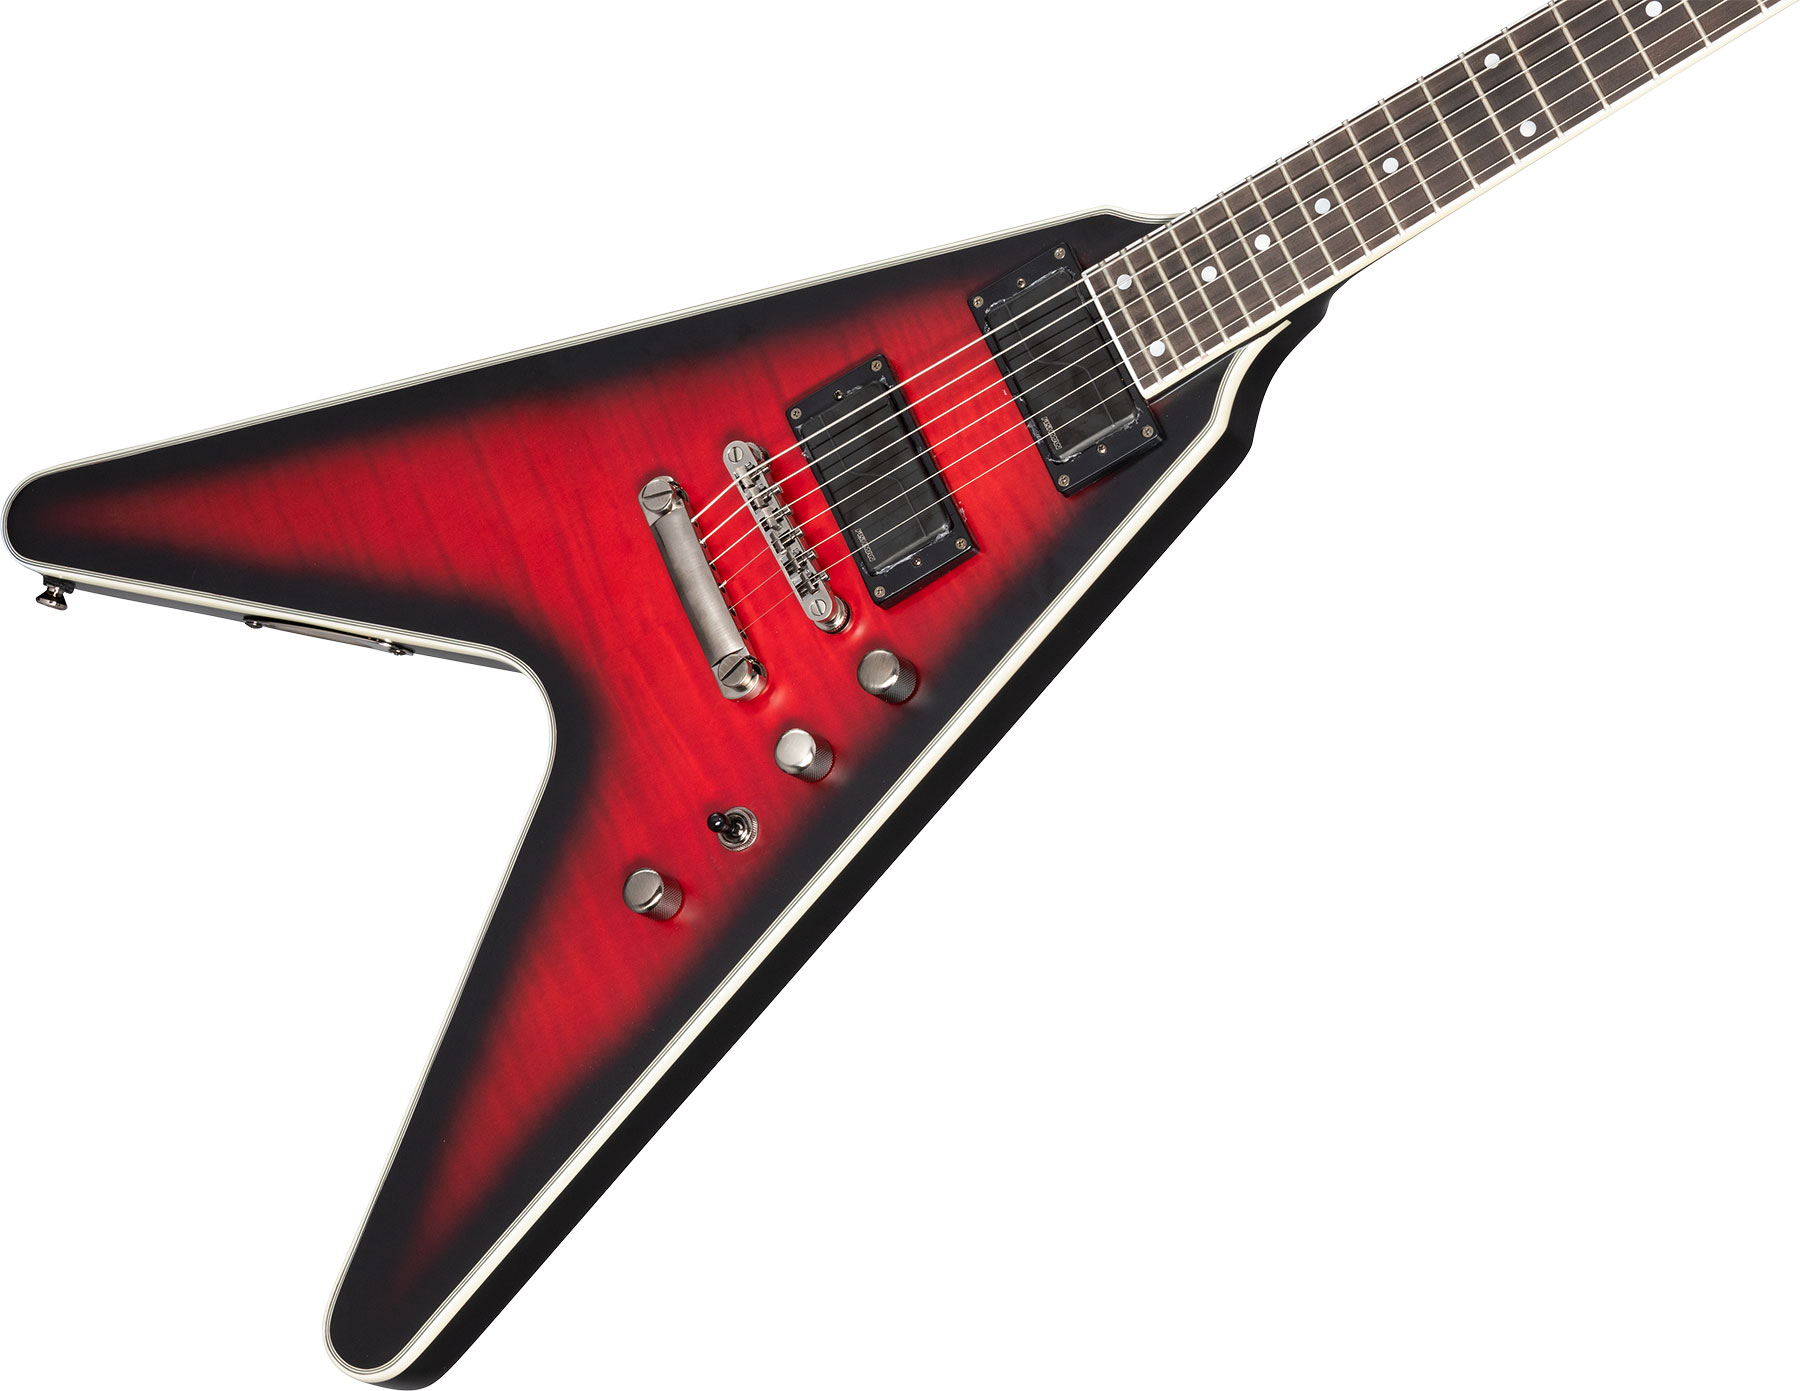 Epiphone Dave Mustaine Flying V Prophecy 2h Fishman Fluence Ht Eb - Aged Dark Red Burst - Guitarra electrica metalica - Variation 3